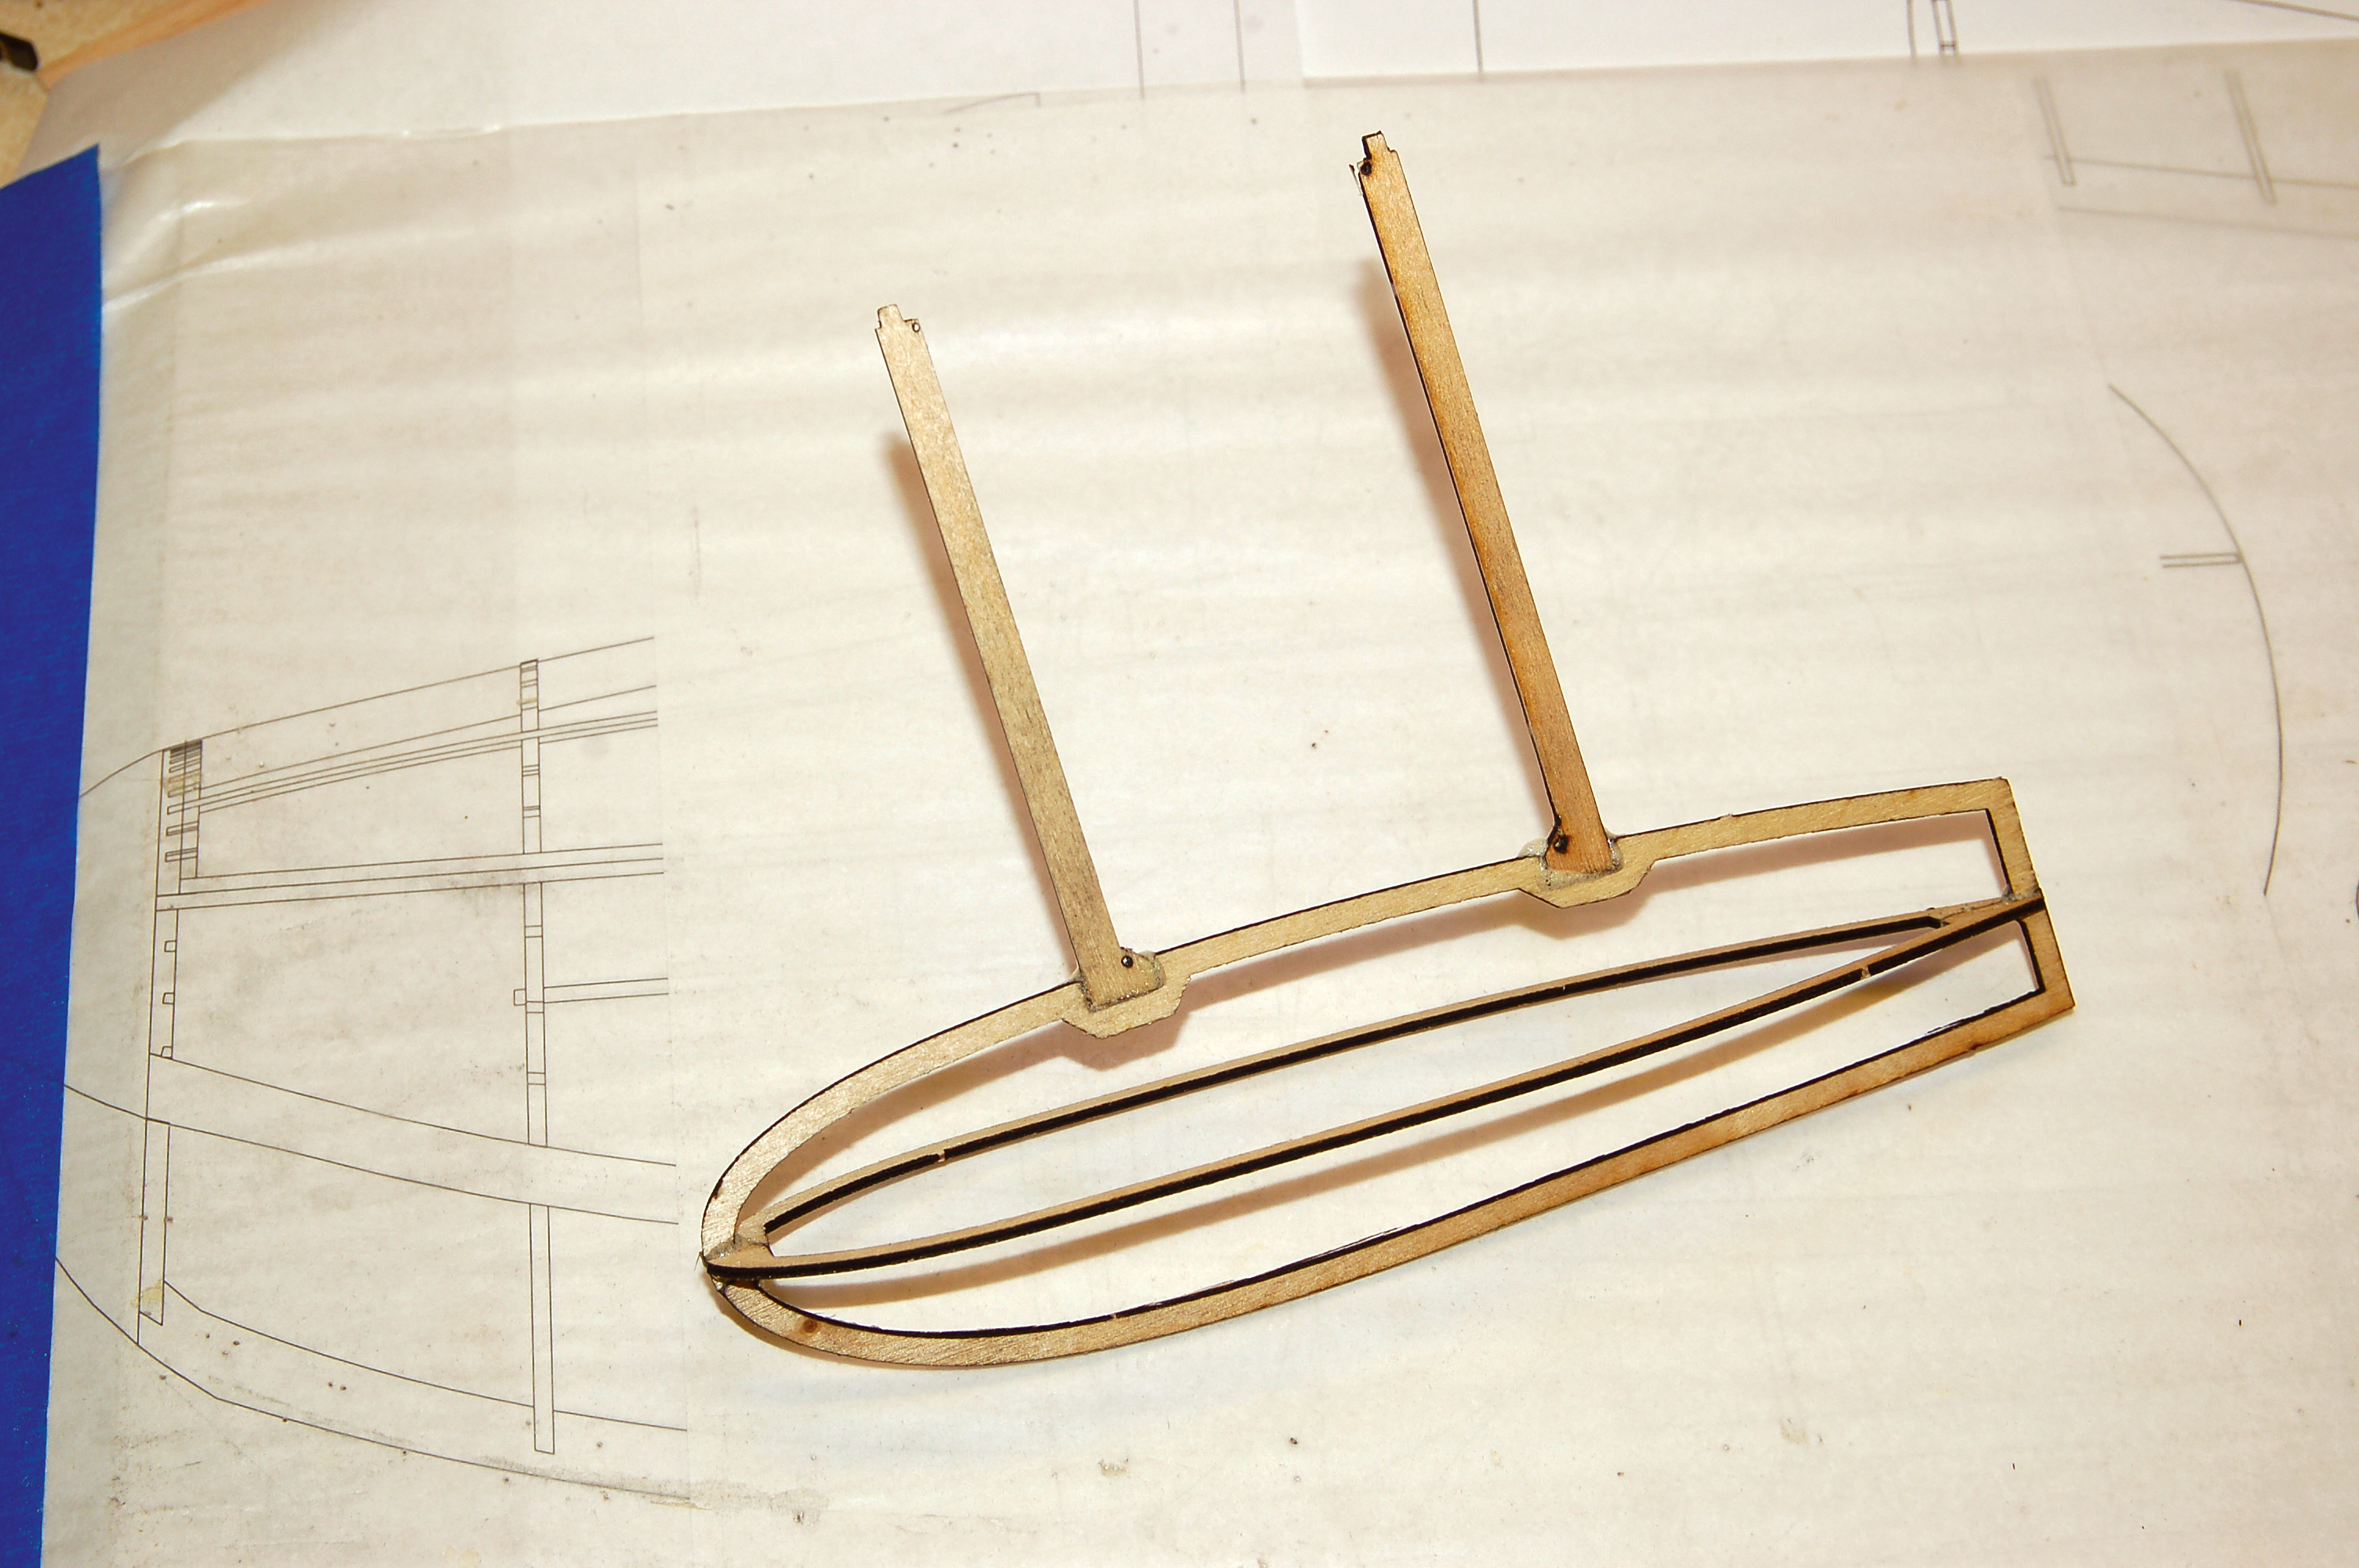 The wingtip floats are easy to shape by sanding oversized balsa or foam fi ll down to these scale plywood outlines.